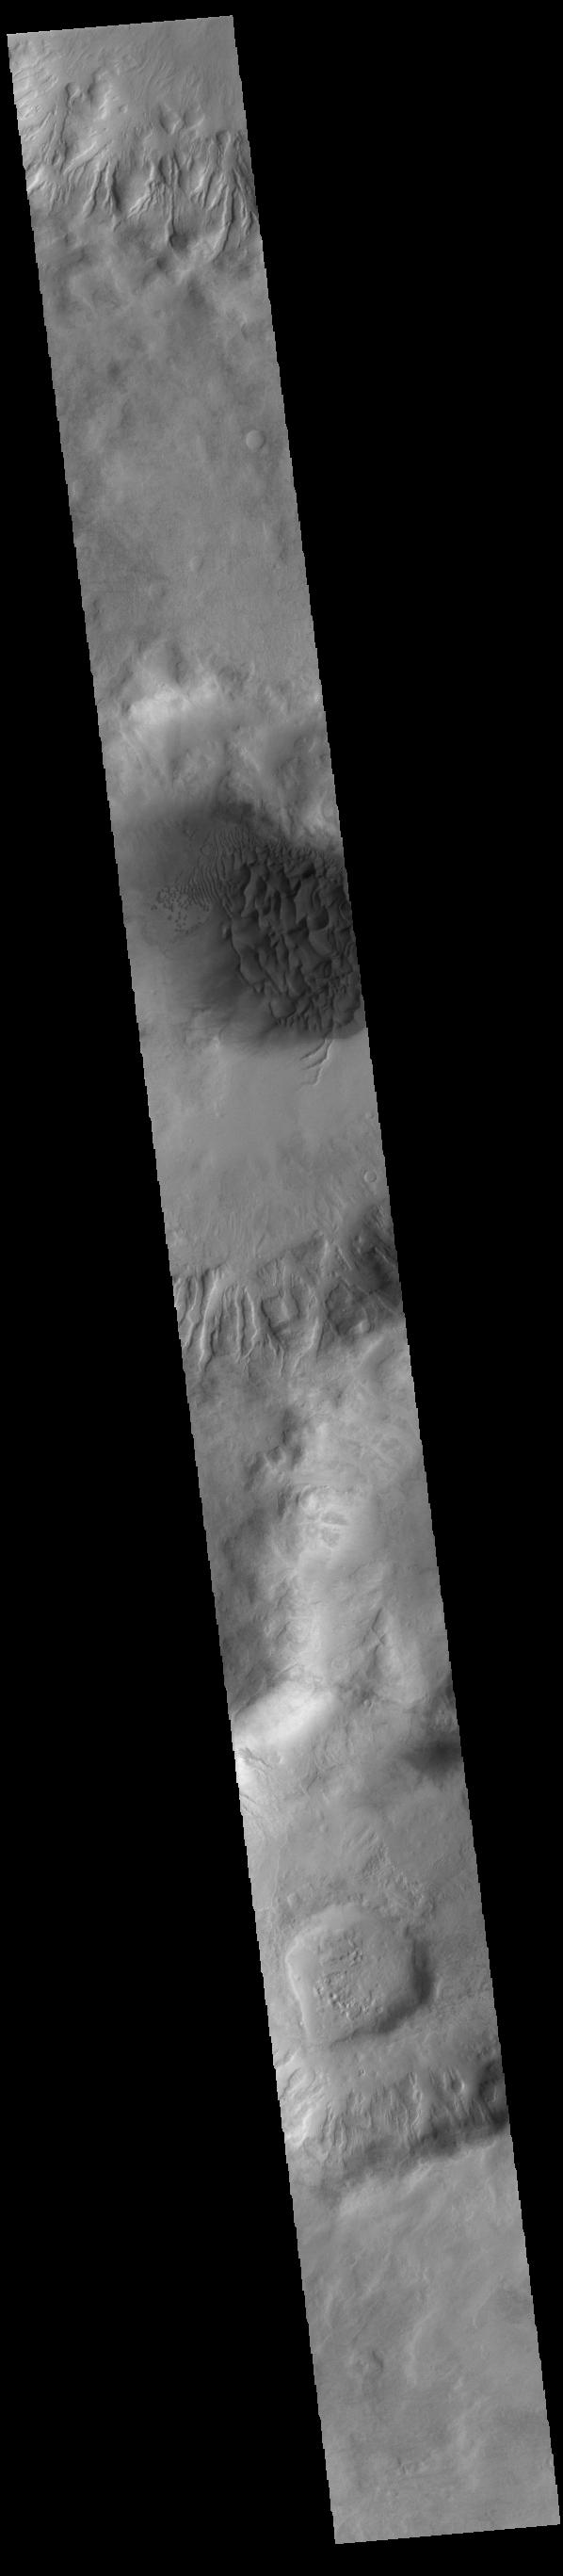 This image from NASAs Mars Odyssey shows a large sand sheet with surface dune forms as well as smaller sand dunes within an unnamed crater in Noachis Terra.